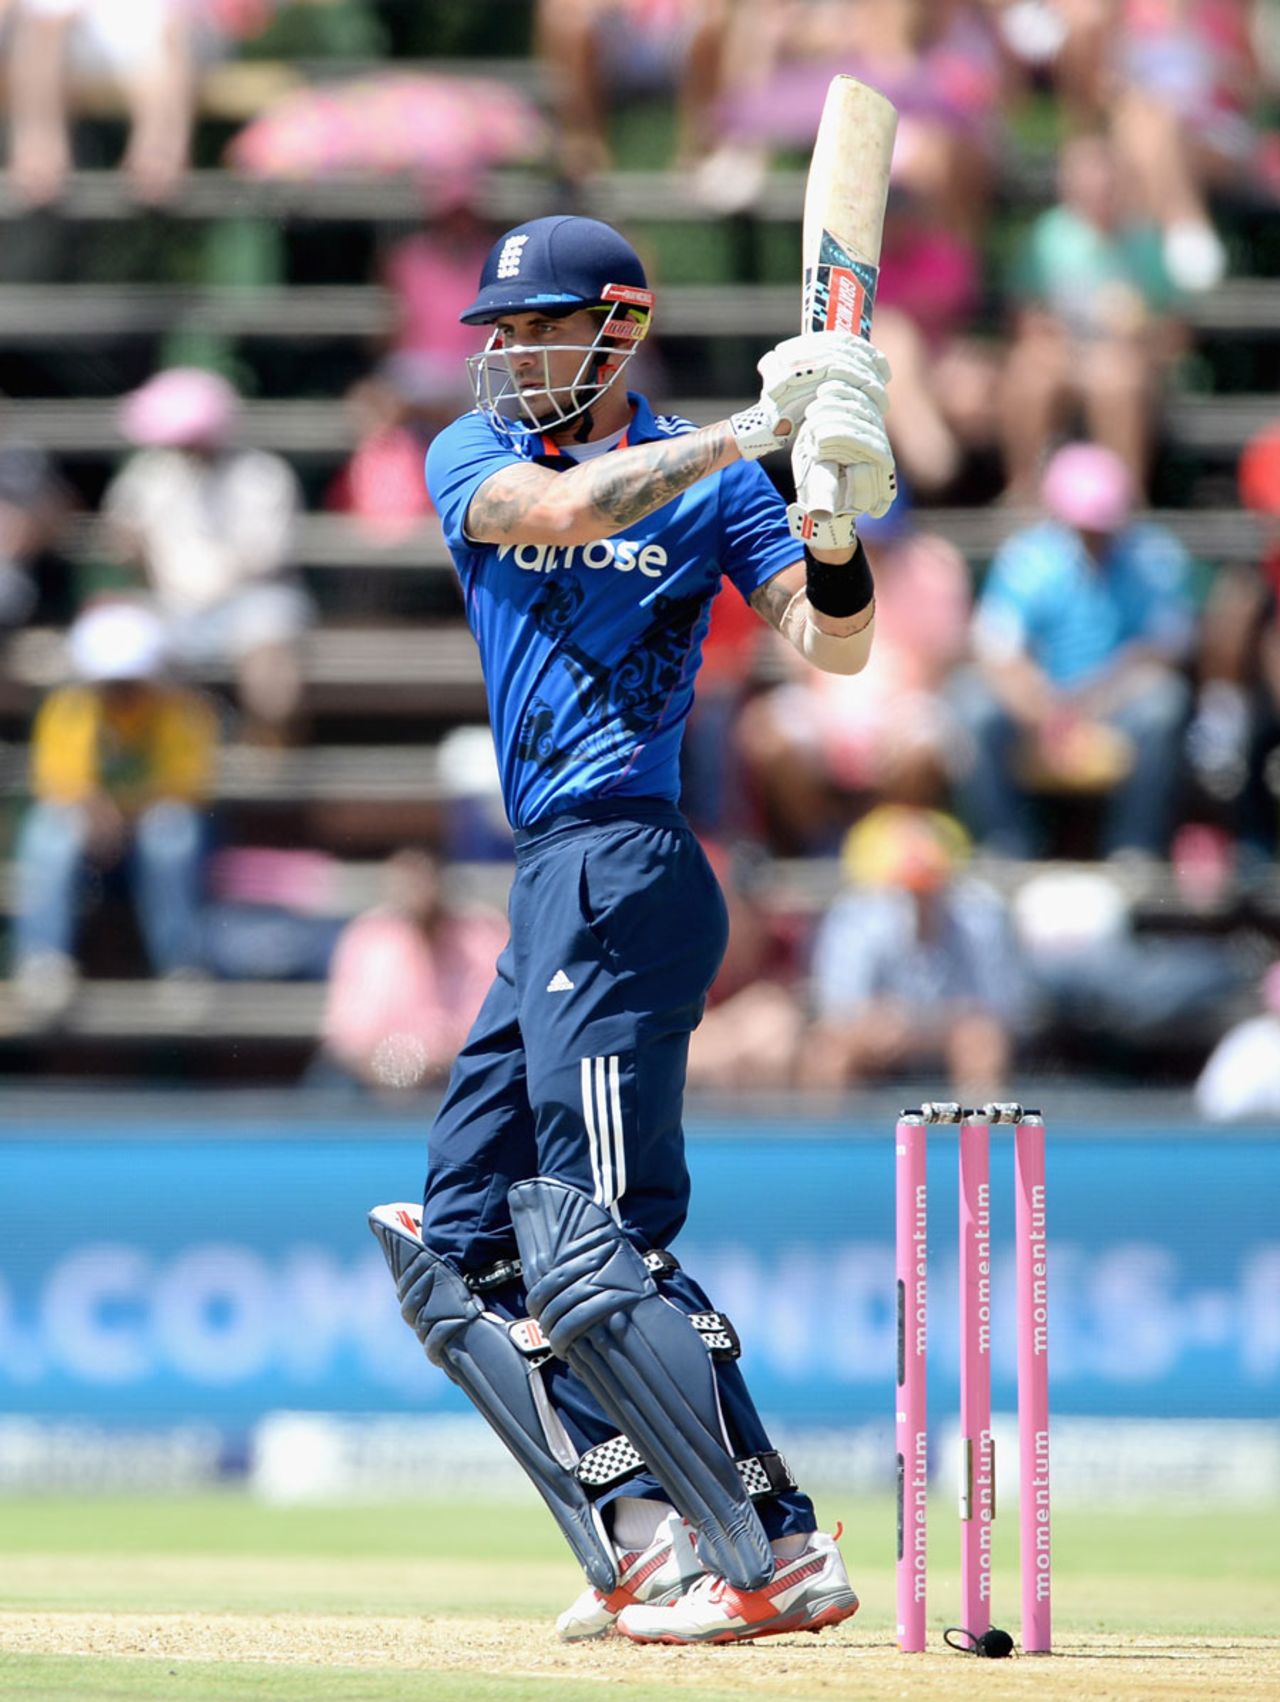 Alex Hales made his fourth fifty in a row, South Africa v England, 4th ODI, Johannesburg, February 12, 2016